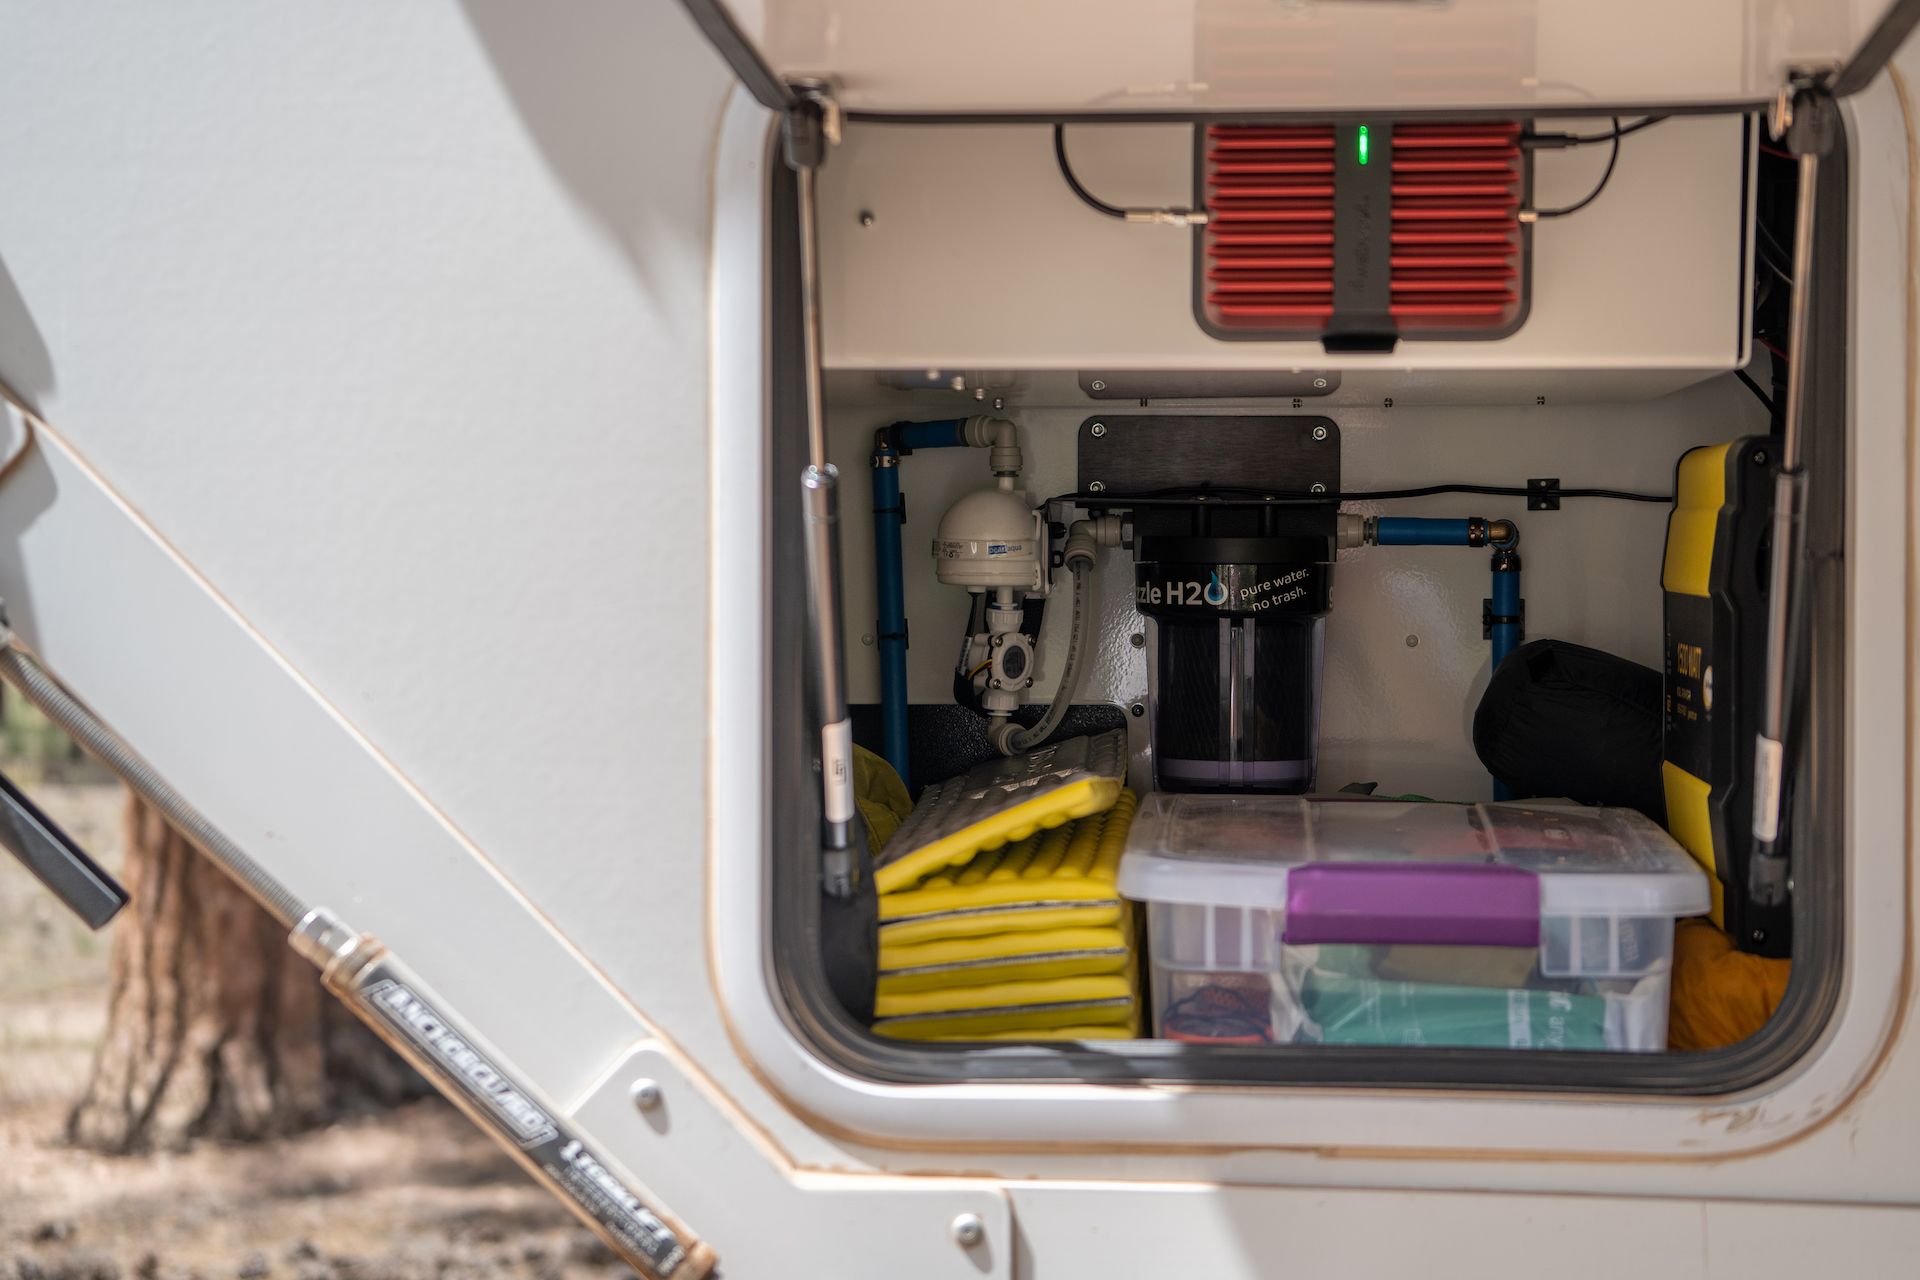 The water purification system from Guzzle H2O installed in the back of our exterior rear storage by BVO